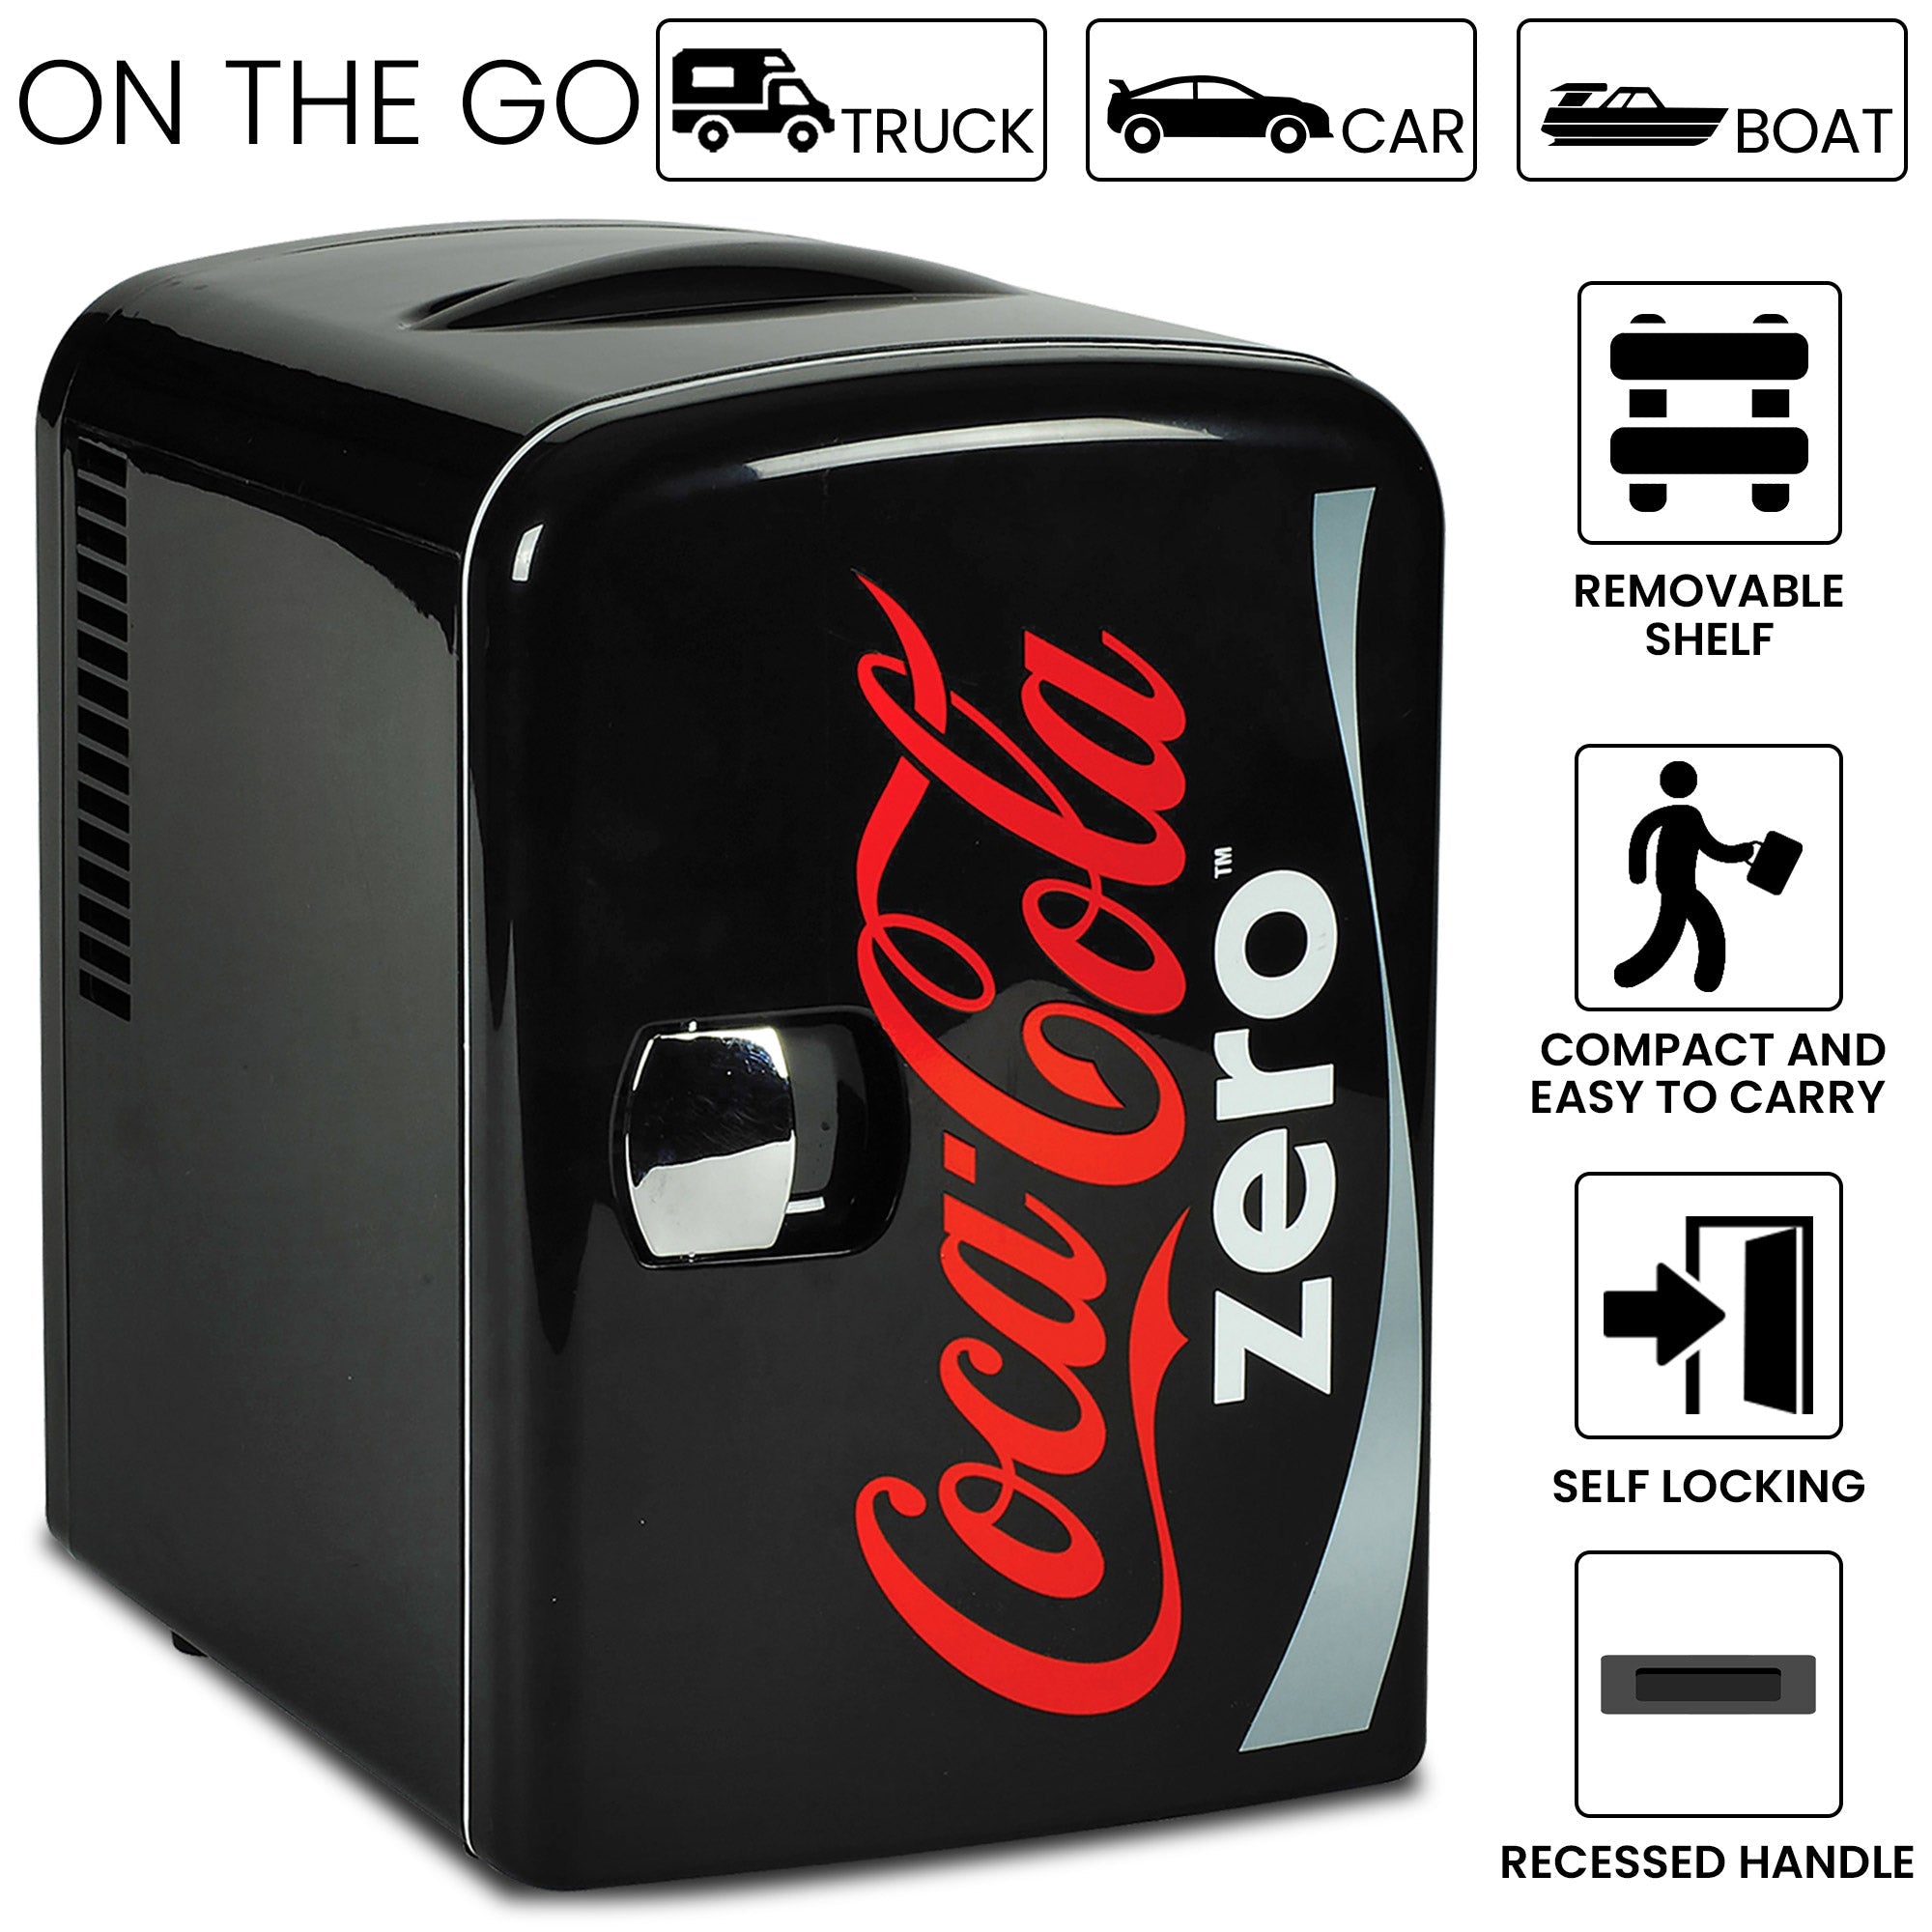 Product shot of Coca-Cola Coke Zero 6 can mini fridge on a white background. Text and icons above describe: On the go - truck car boat. Text and icons to the right describe: Removable shelf; compact and easy to carry; self-locking; recessed handle